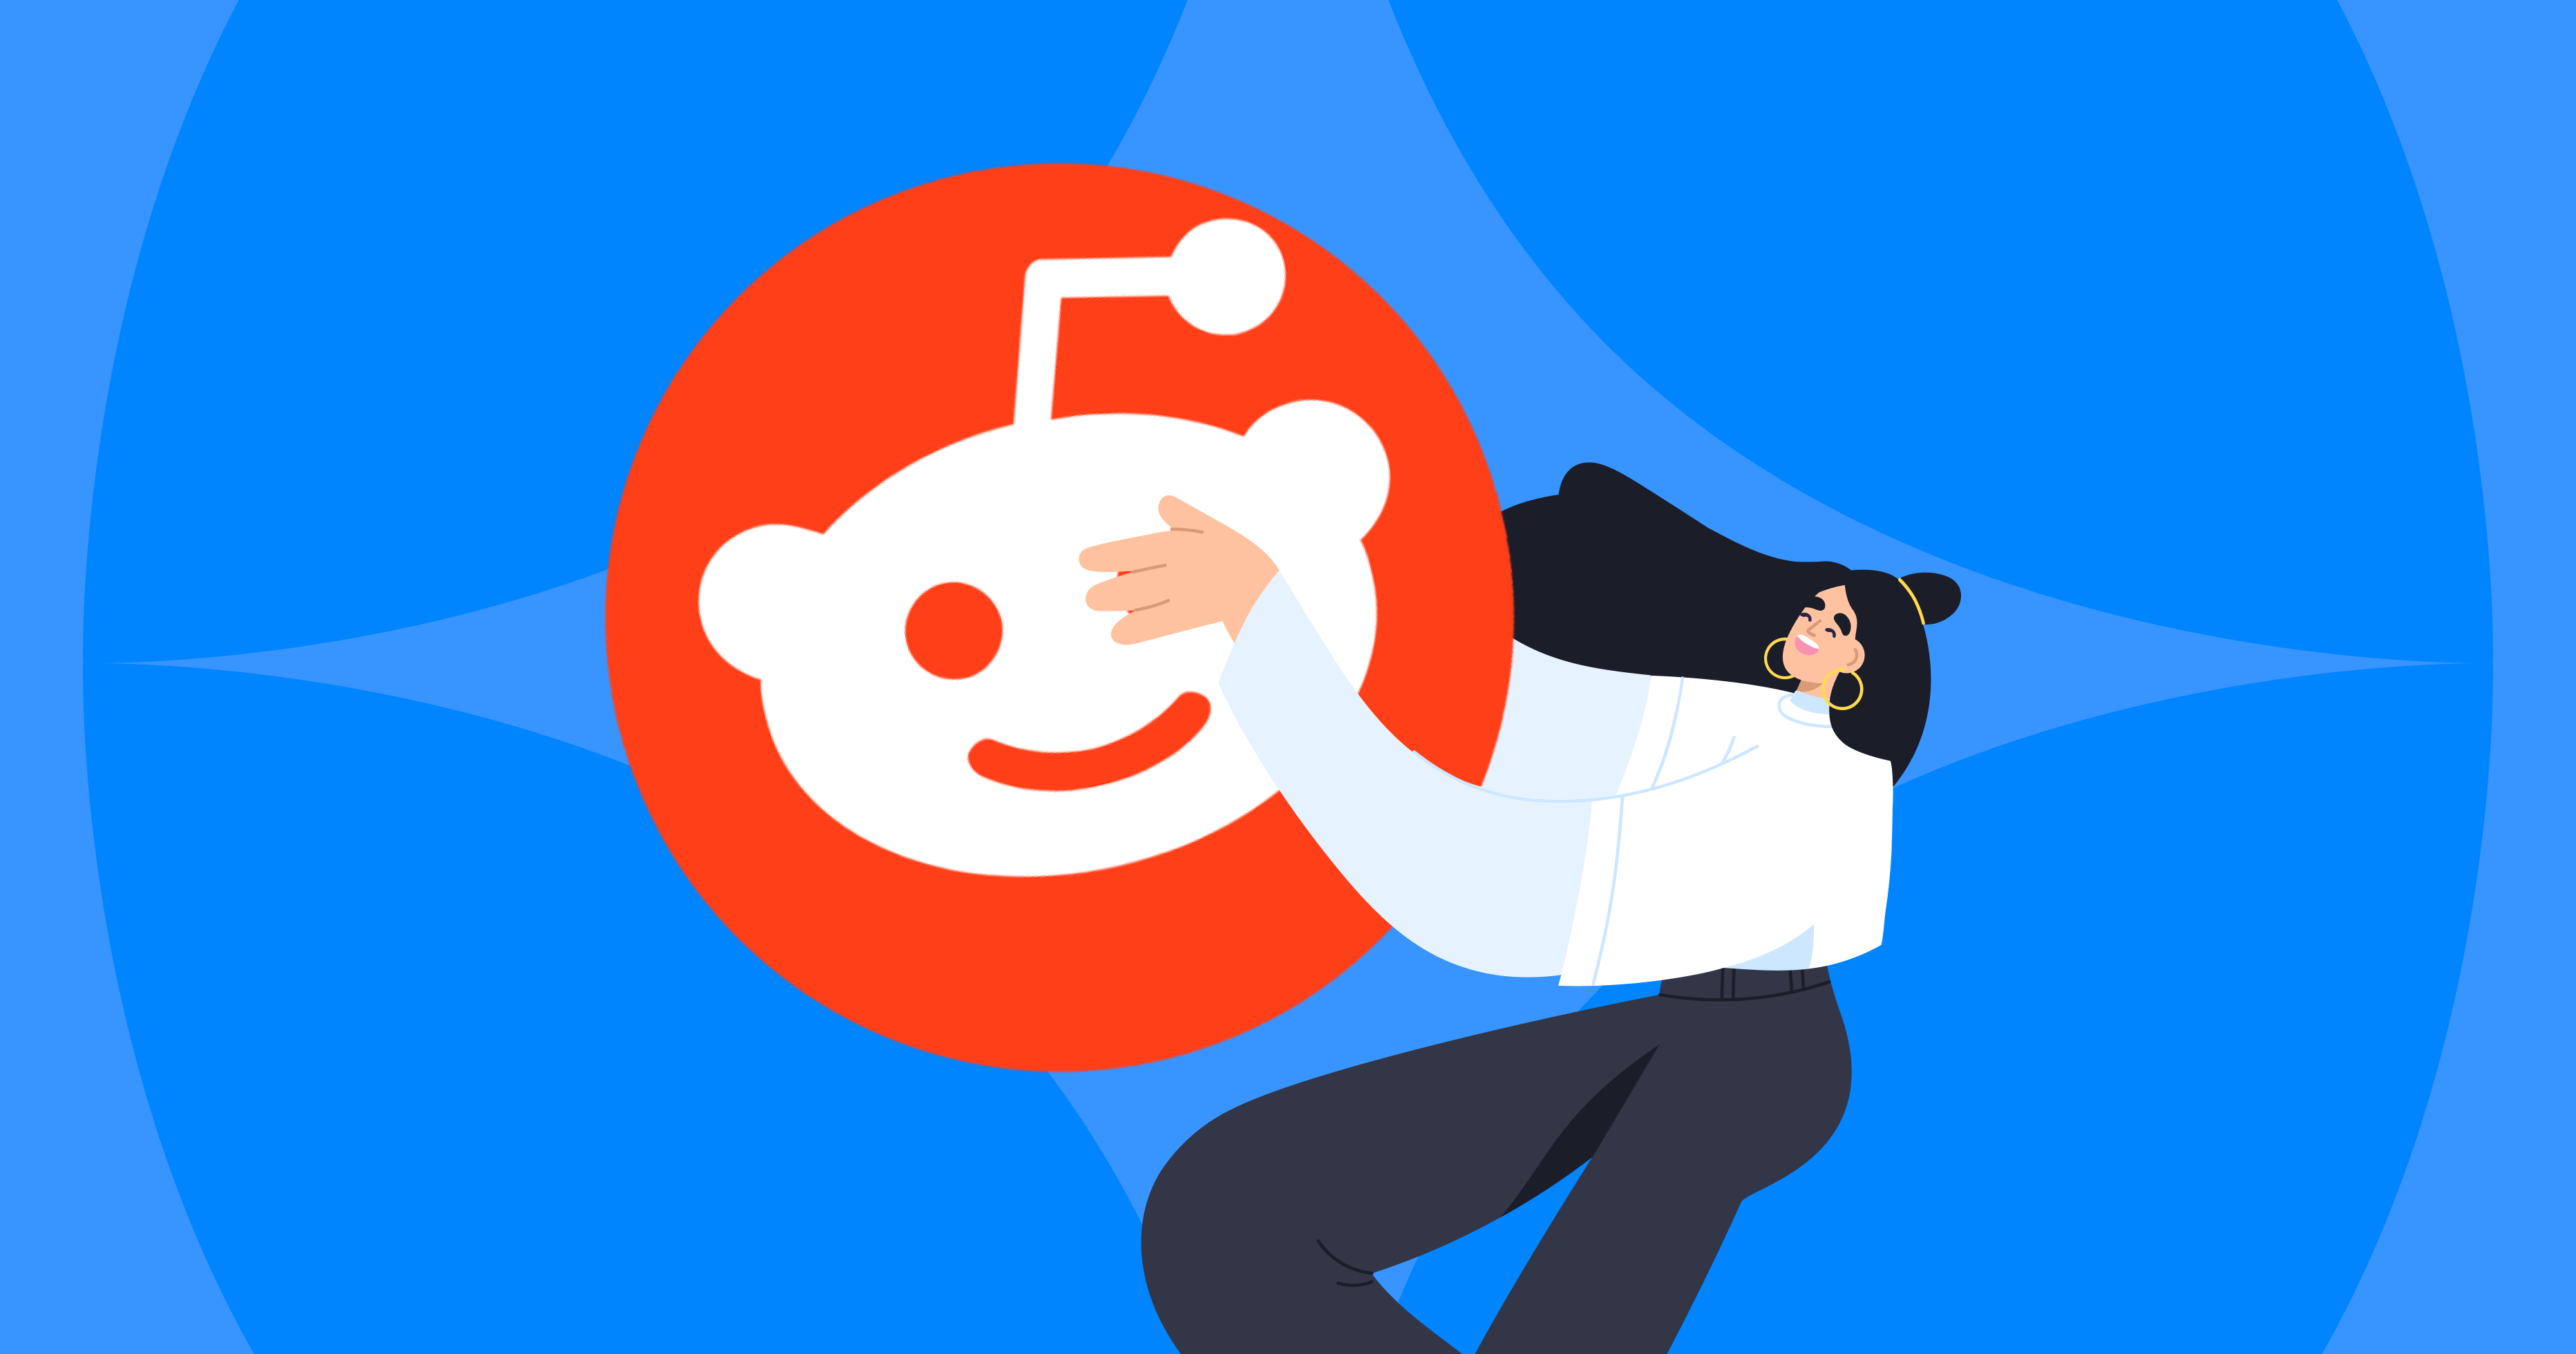 30 Easy Ways to Promote on Reddit Without Getting Banned